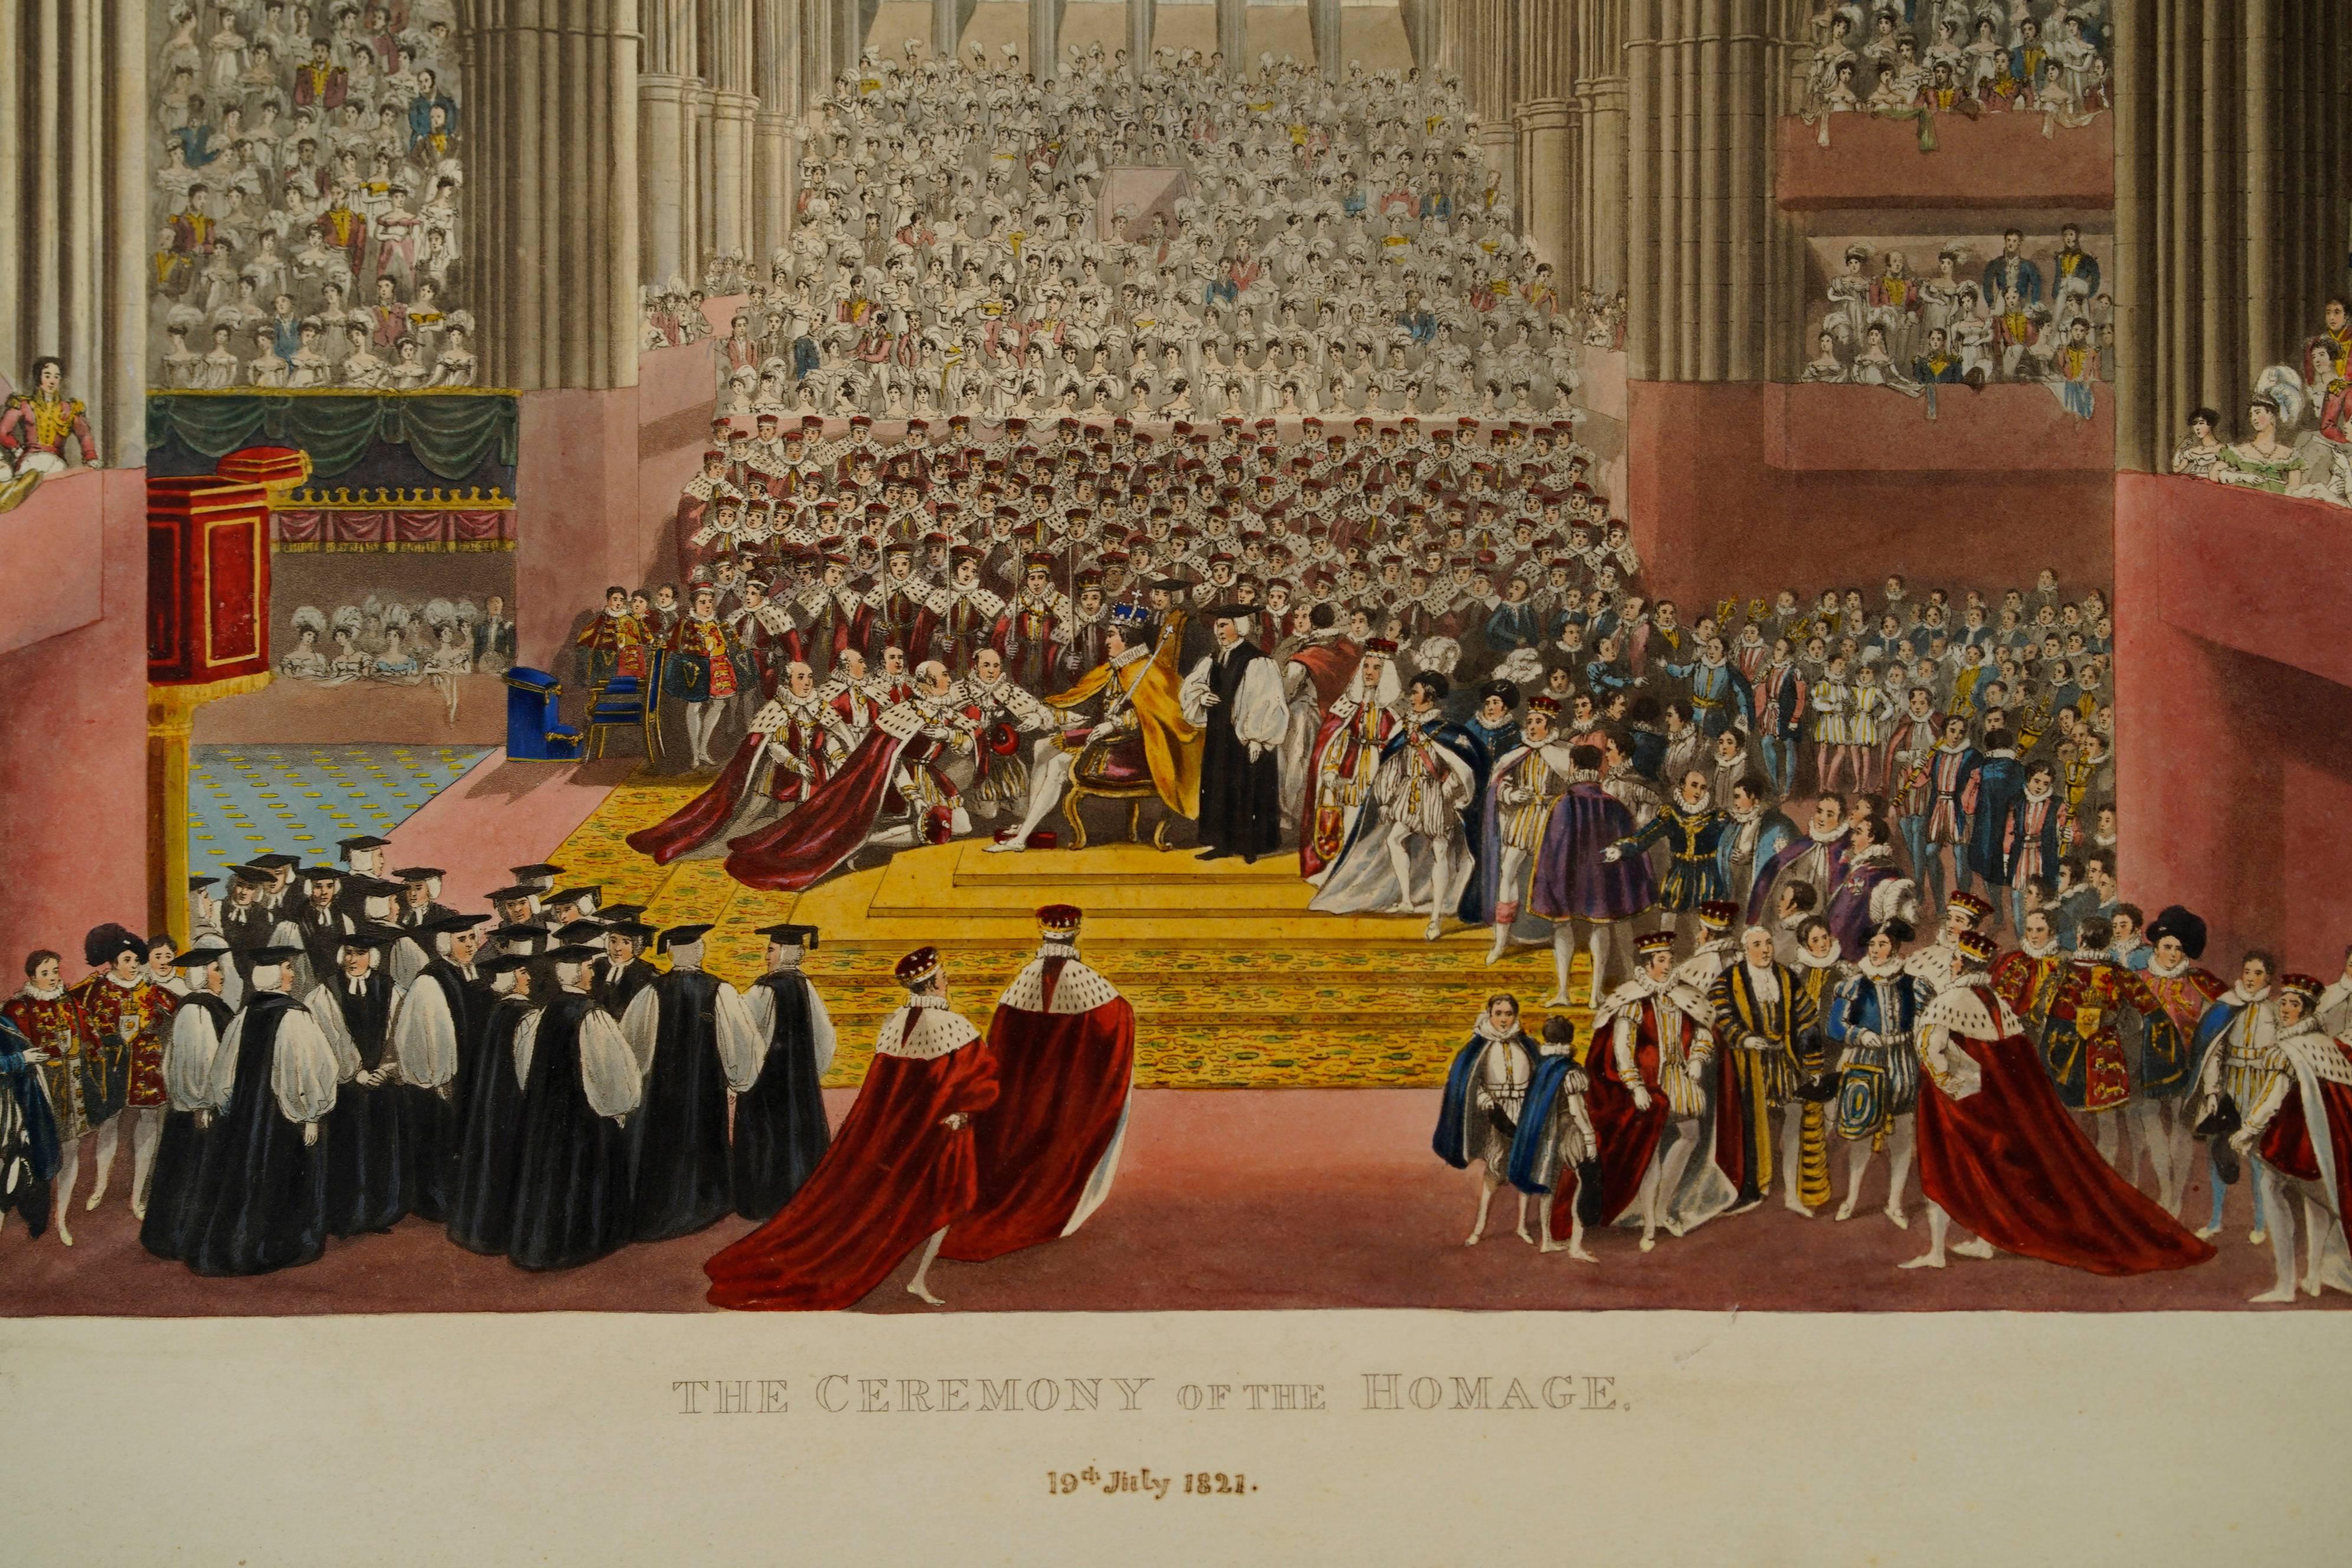 Coronation of King George IV, The Ceremony of the Homage - Print by James Stephanoff